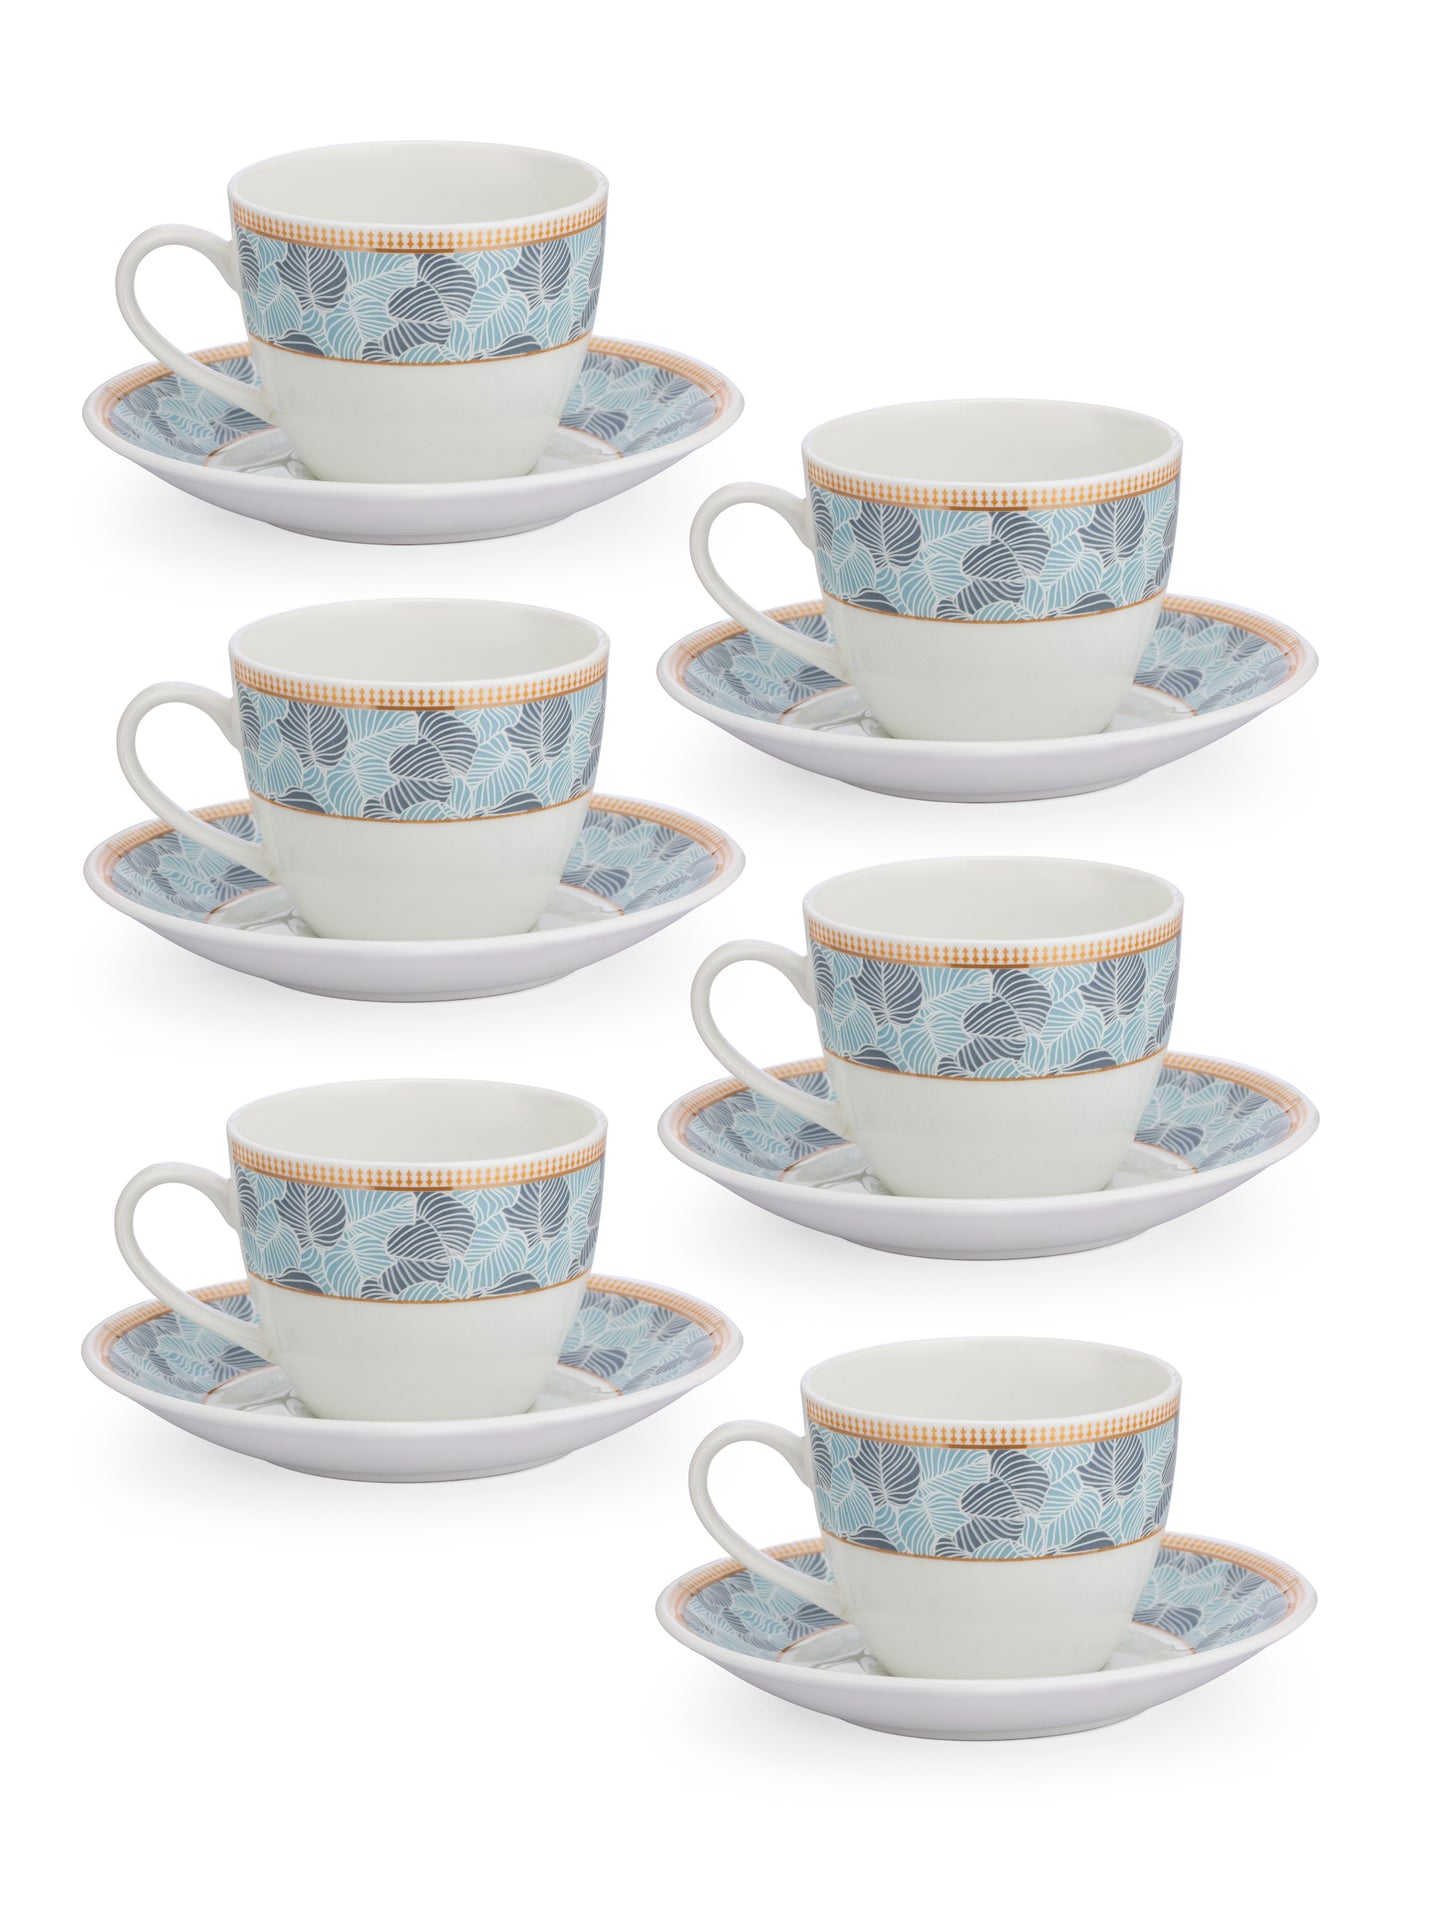 Cream Super Cup & Saucer, 170ml, Set of 12 (6 Cups + 6 Saucers) (S366)